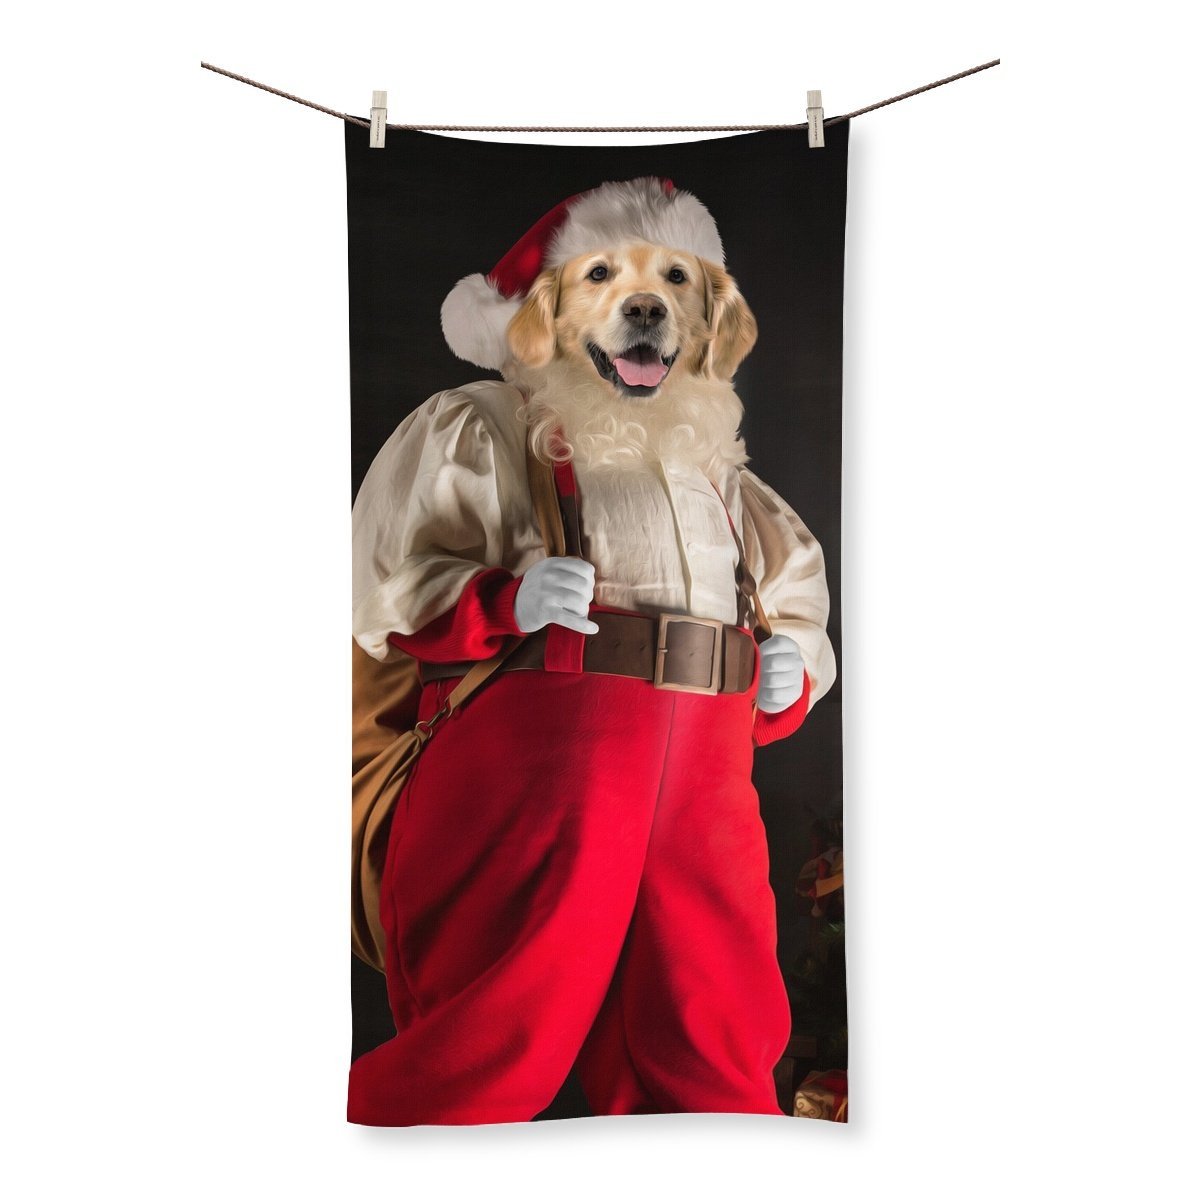 Santa Paws: Custom Pet Towel - Paw & Glory - #pet portraits# - #dog portraits# - #pet portraits uk#Paw & Glory, paw and glory, animal portrait pictures, dog and owner portraits, best dog paintings, pet photo clothing, custom dog painting, painting of your dog, pet portraits,pet portraits Towel